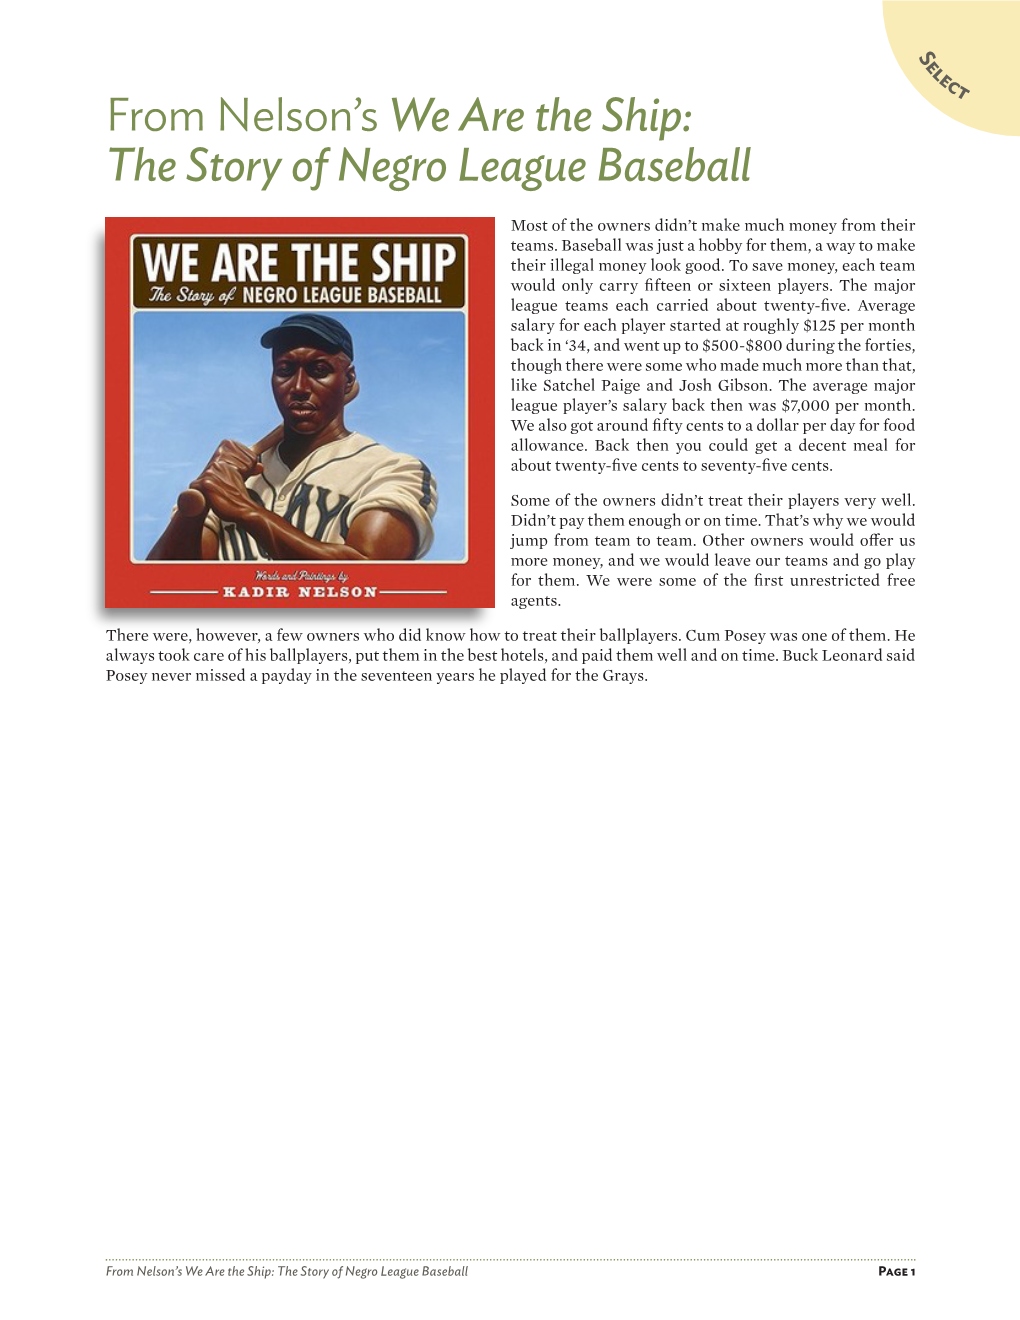 From Nelson's We Are the Ship: the Story of Negro League Baseball